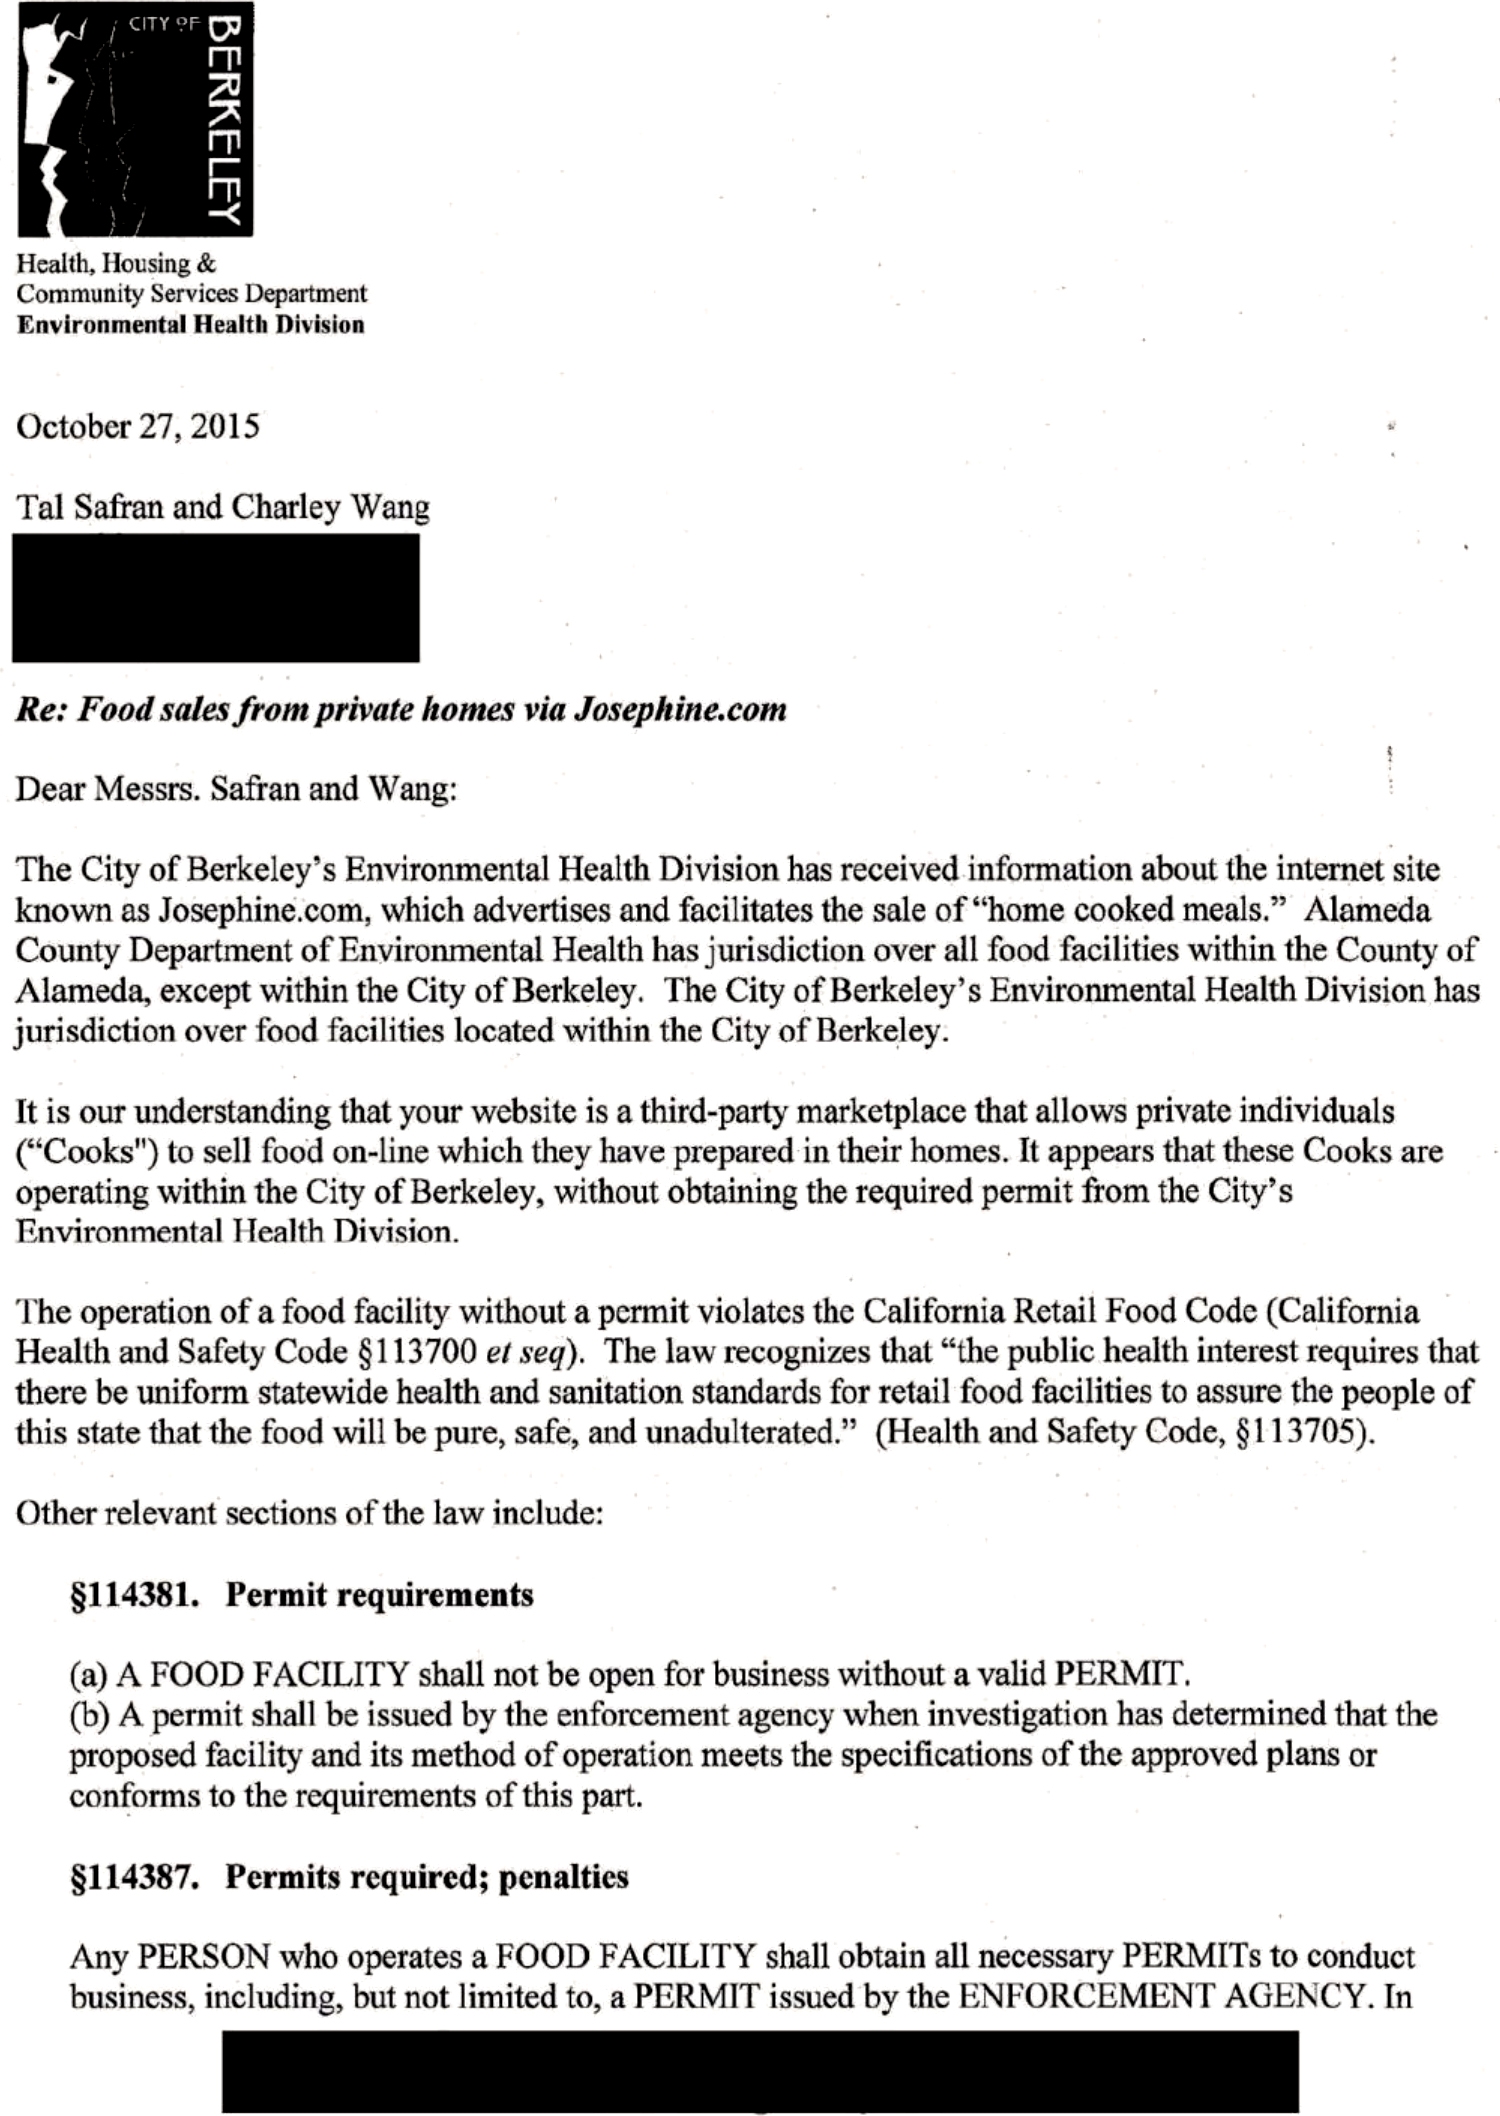 An image shows the first page of the letter from Health. Housing & Community Services Department Environmental Health Division to the CEO of Josephine Company.